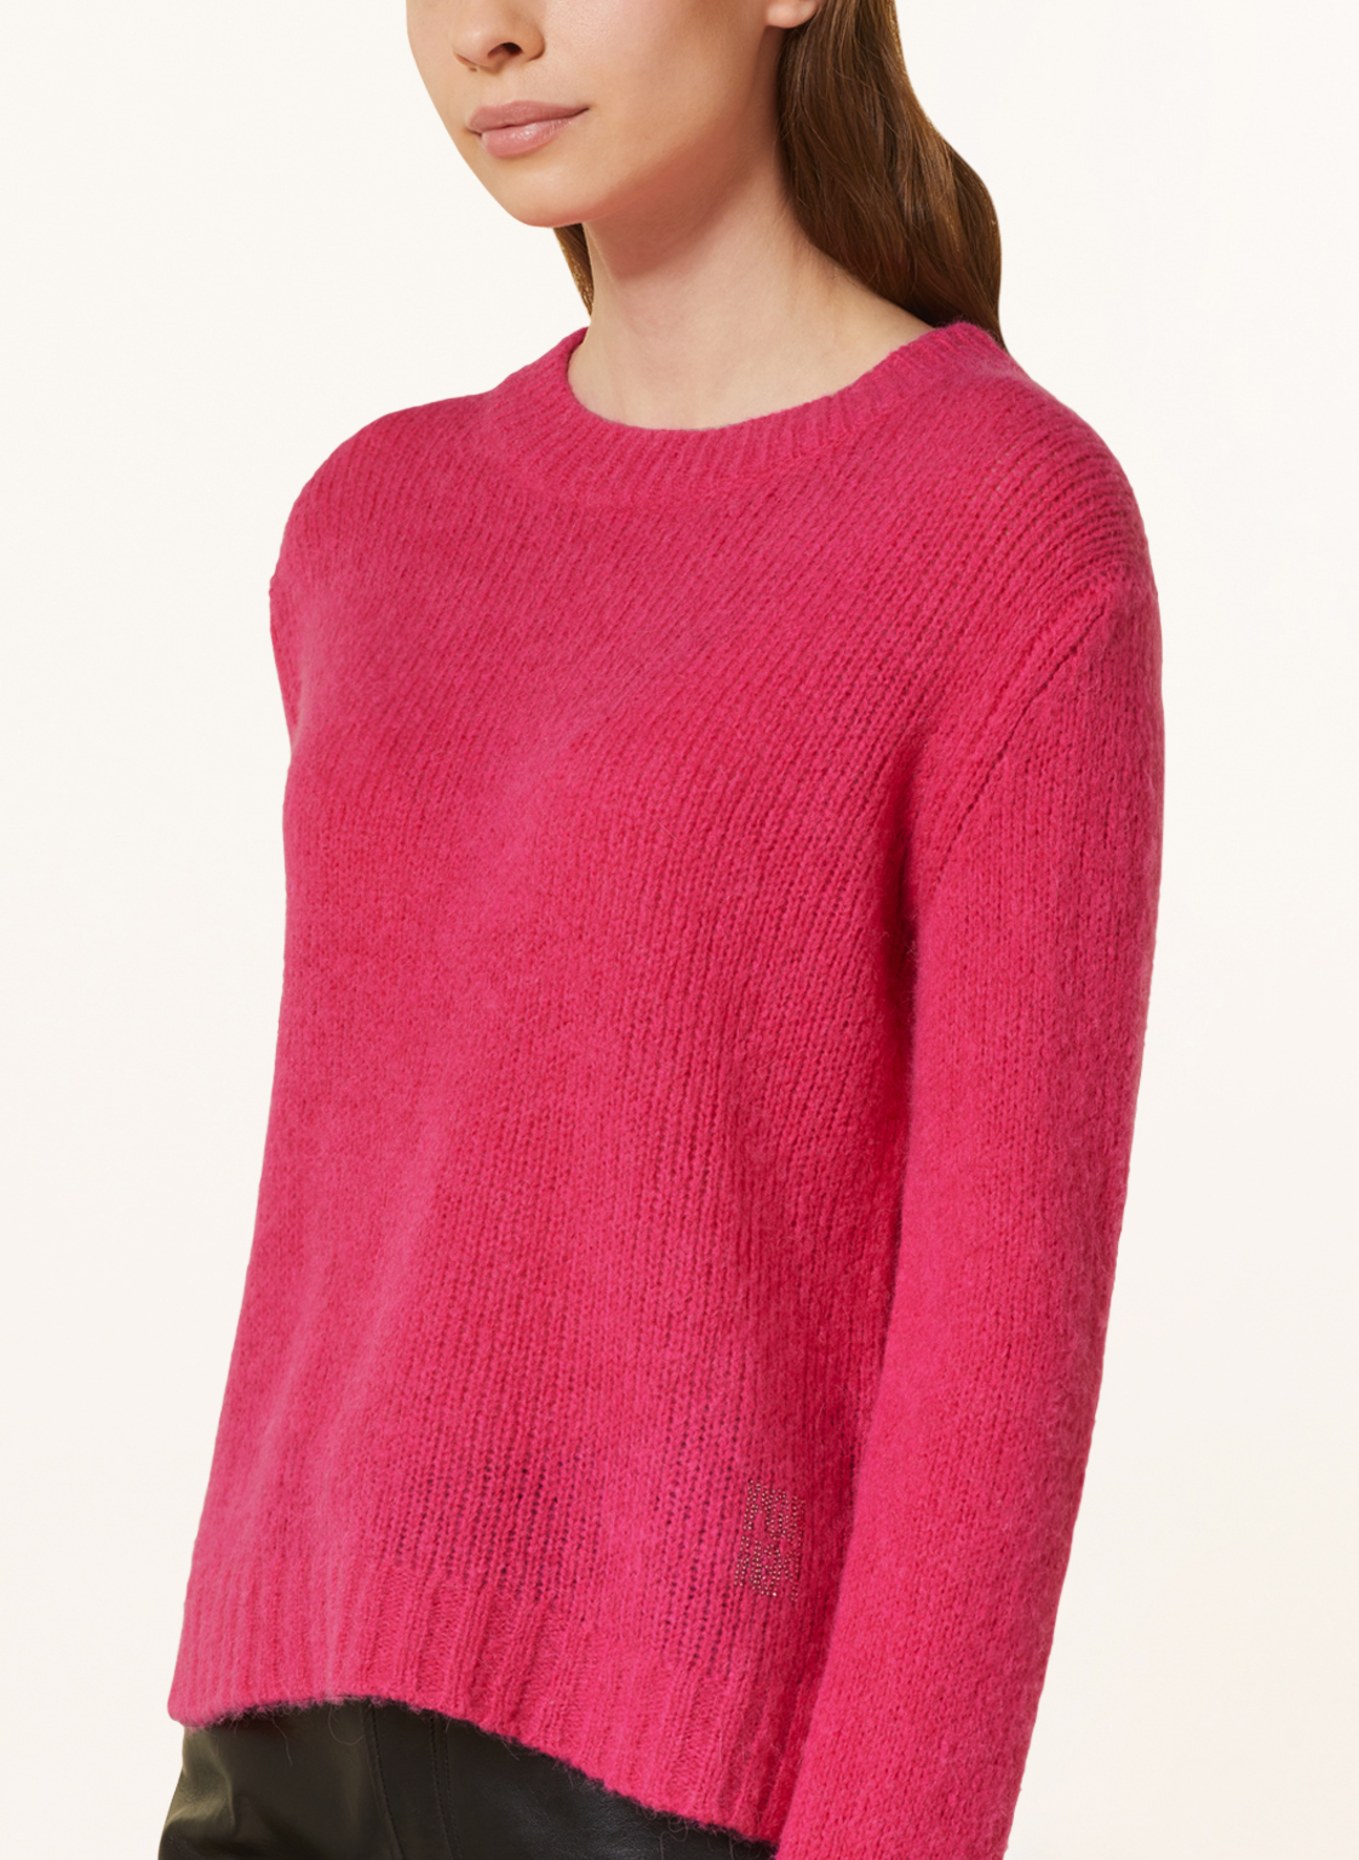 Princess GOES HOLLYWOOD Oversized-Pullover, Farbe: PINK (Bild 4)